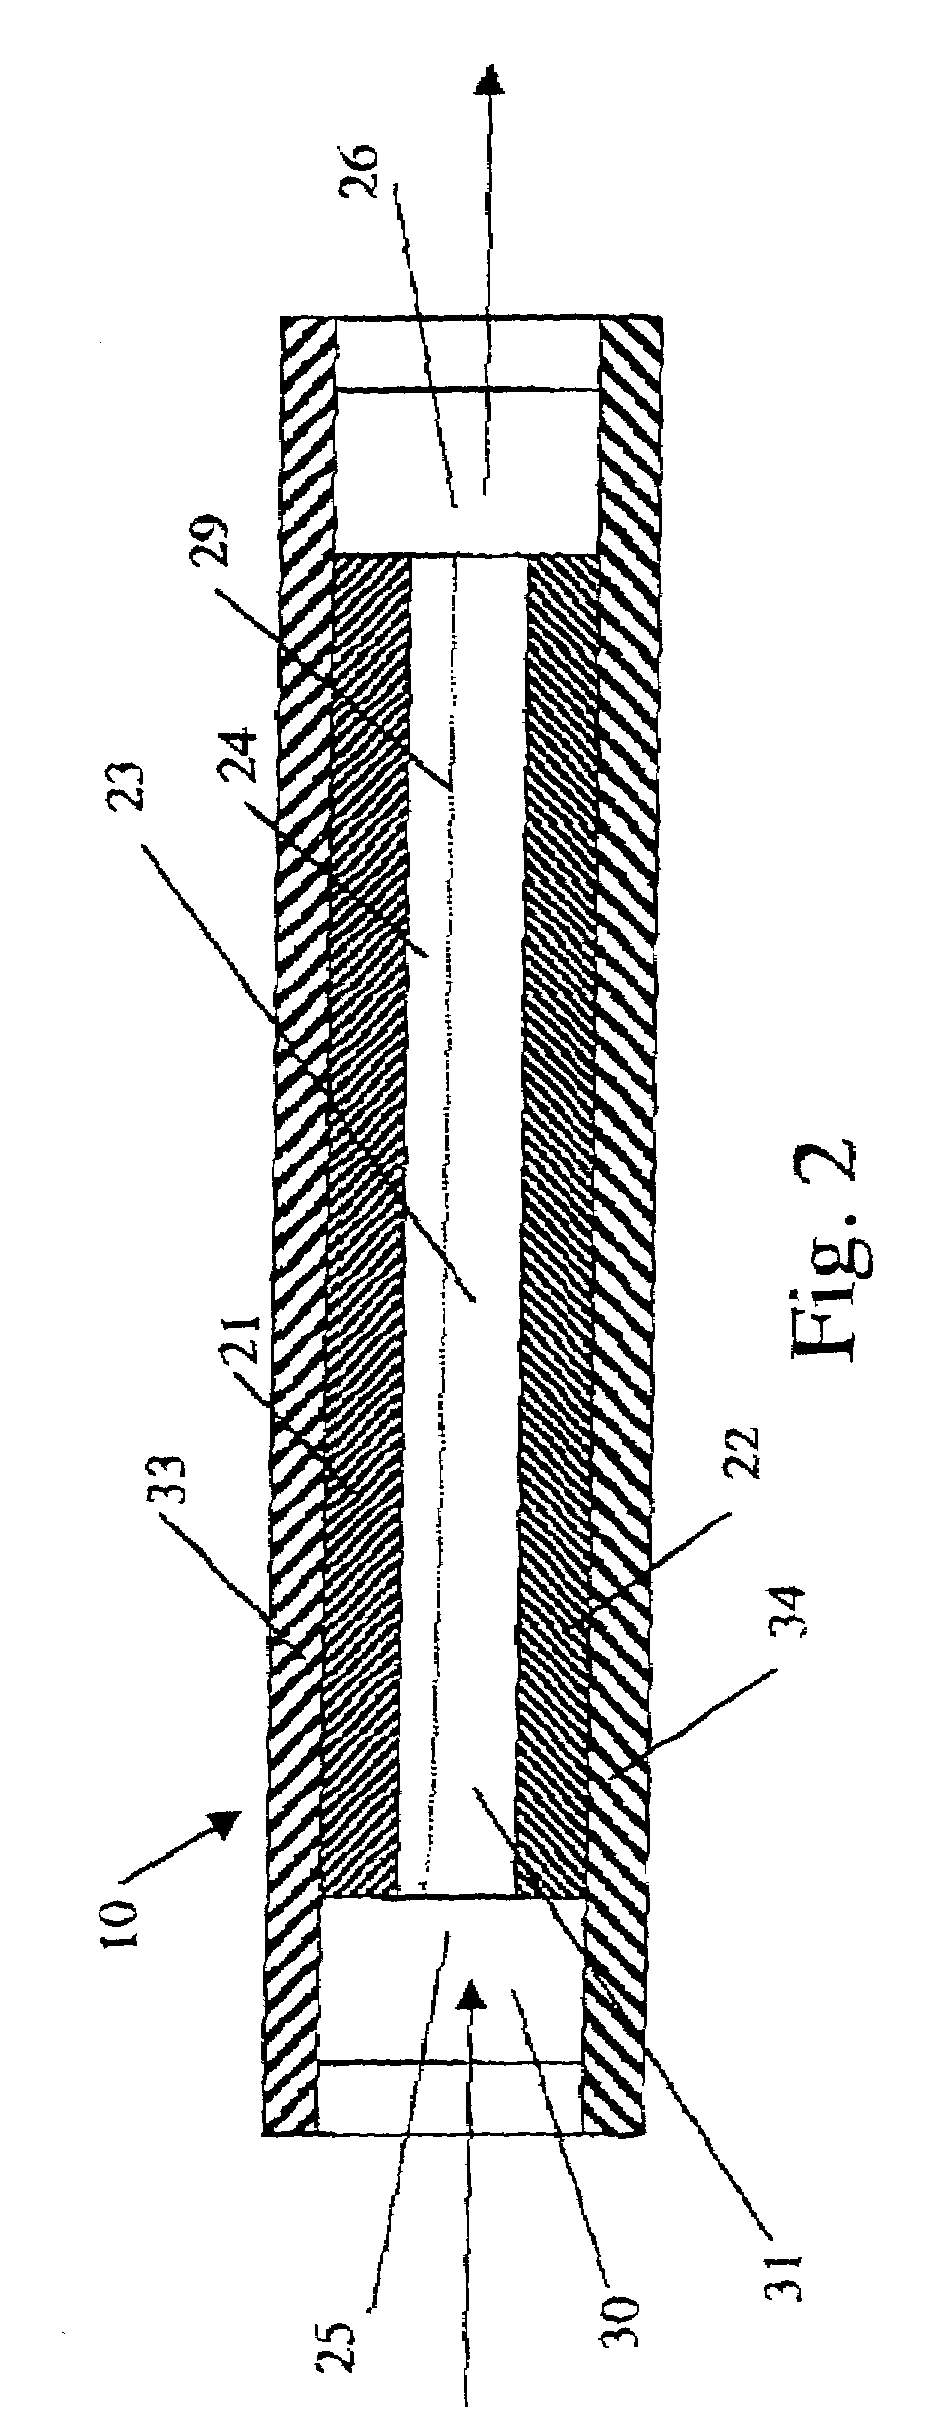 Electrolysis cell for generating chlorine dioxide